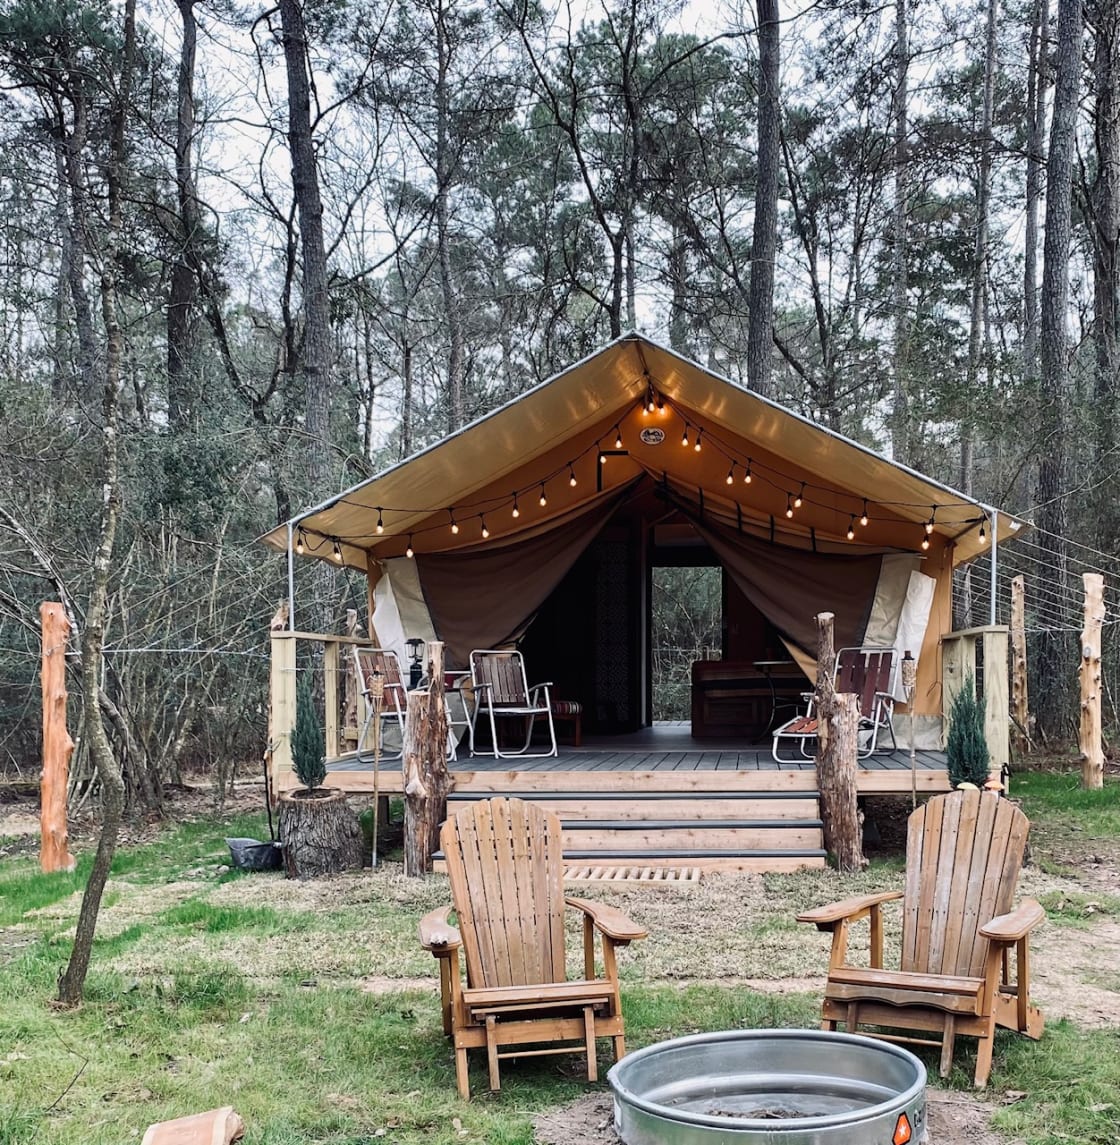 Our luxury tent has a front and back porch, a back screen door, a bathroom, mini-split HVAC, a ceiling fan, WiFi, assorted teas, coffee, snacks, a fridge/freezer, a microwave, a queen-size bed, night-stands, mid-century table and chairs and so much more.